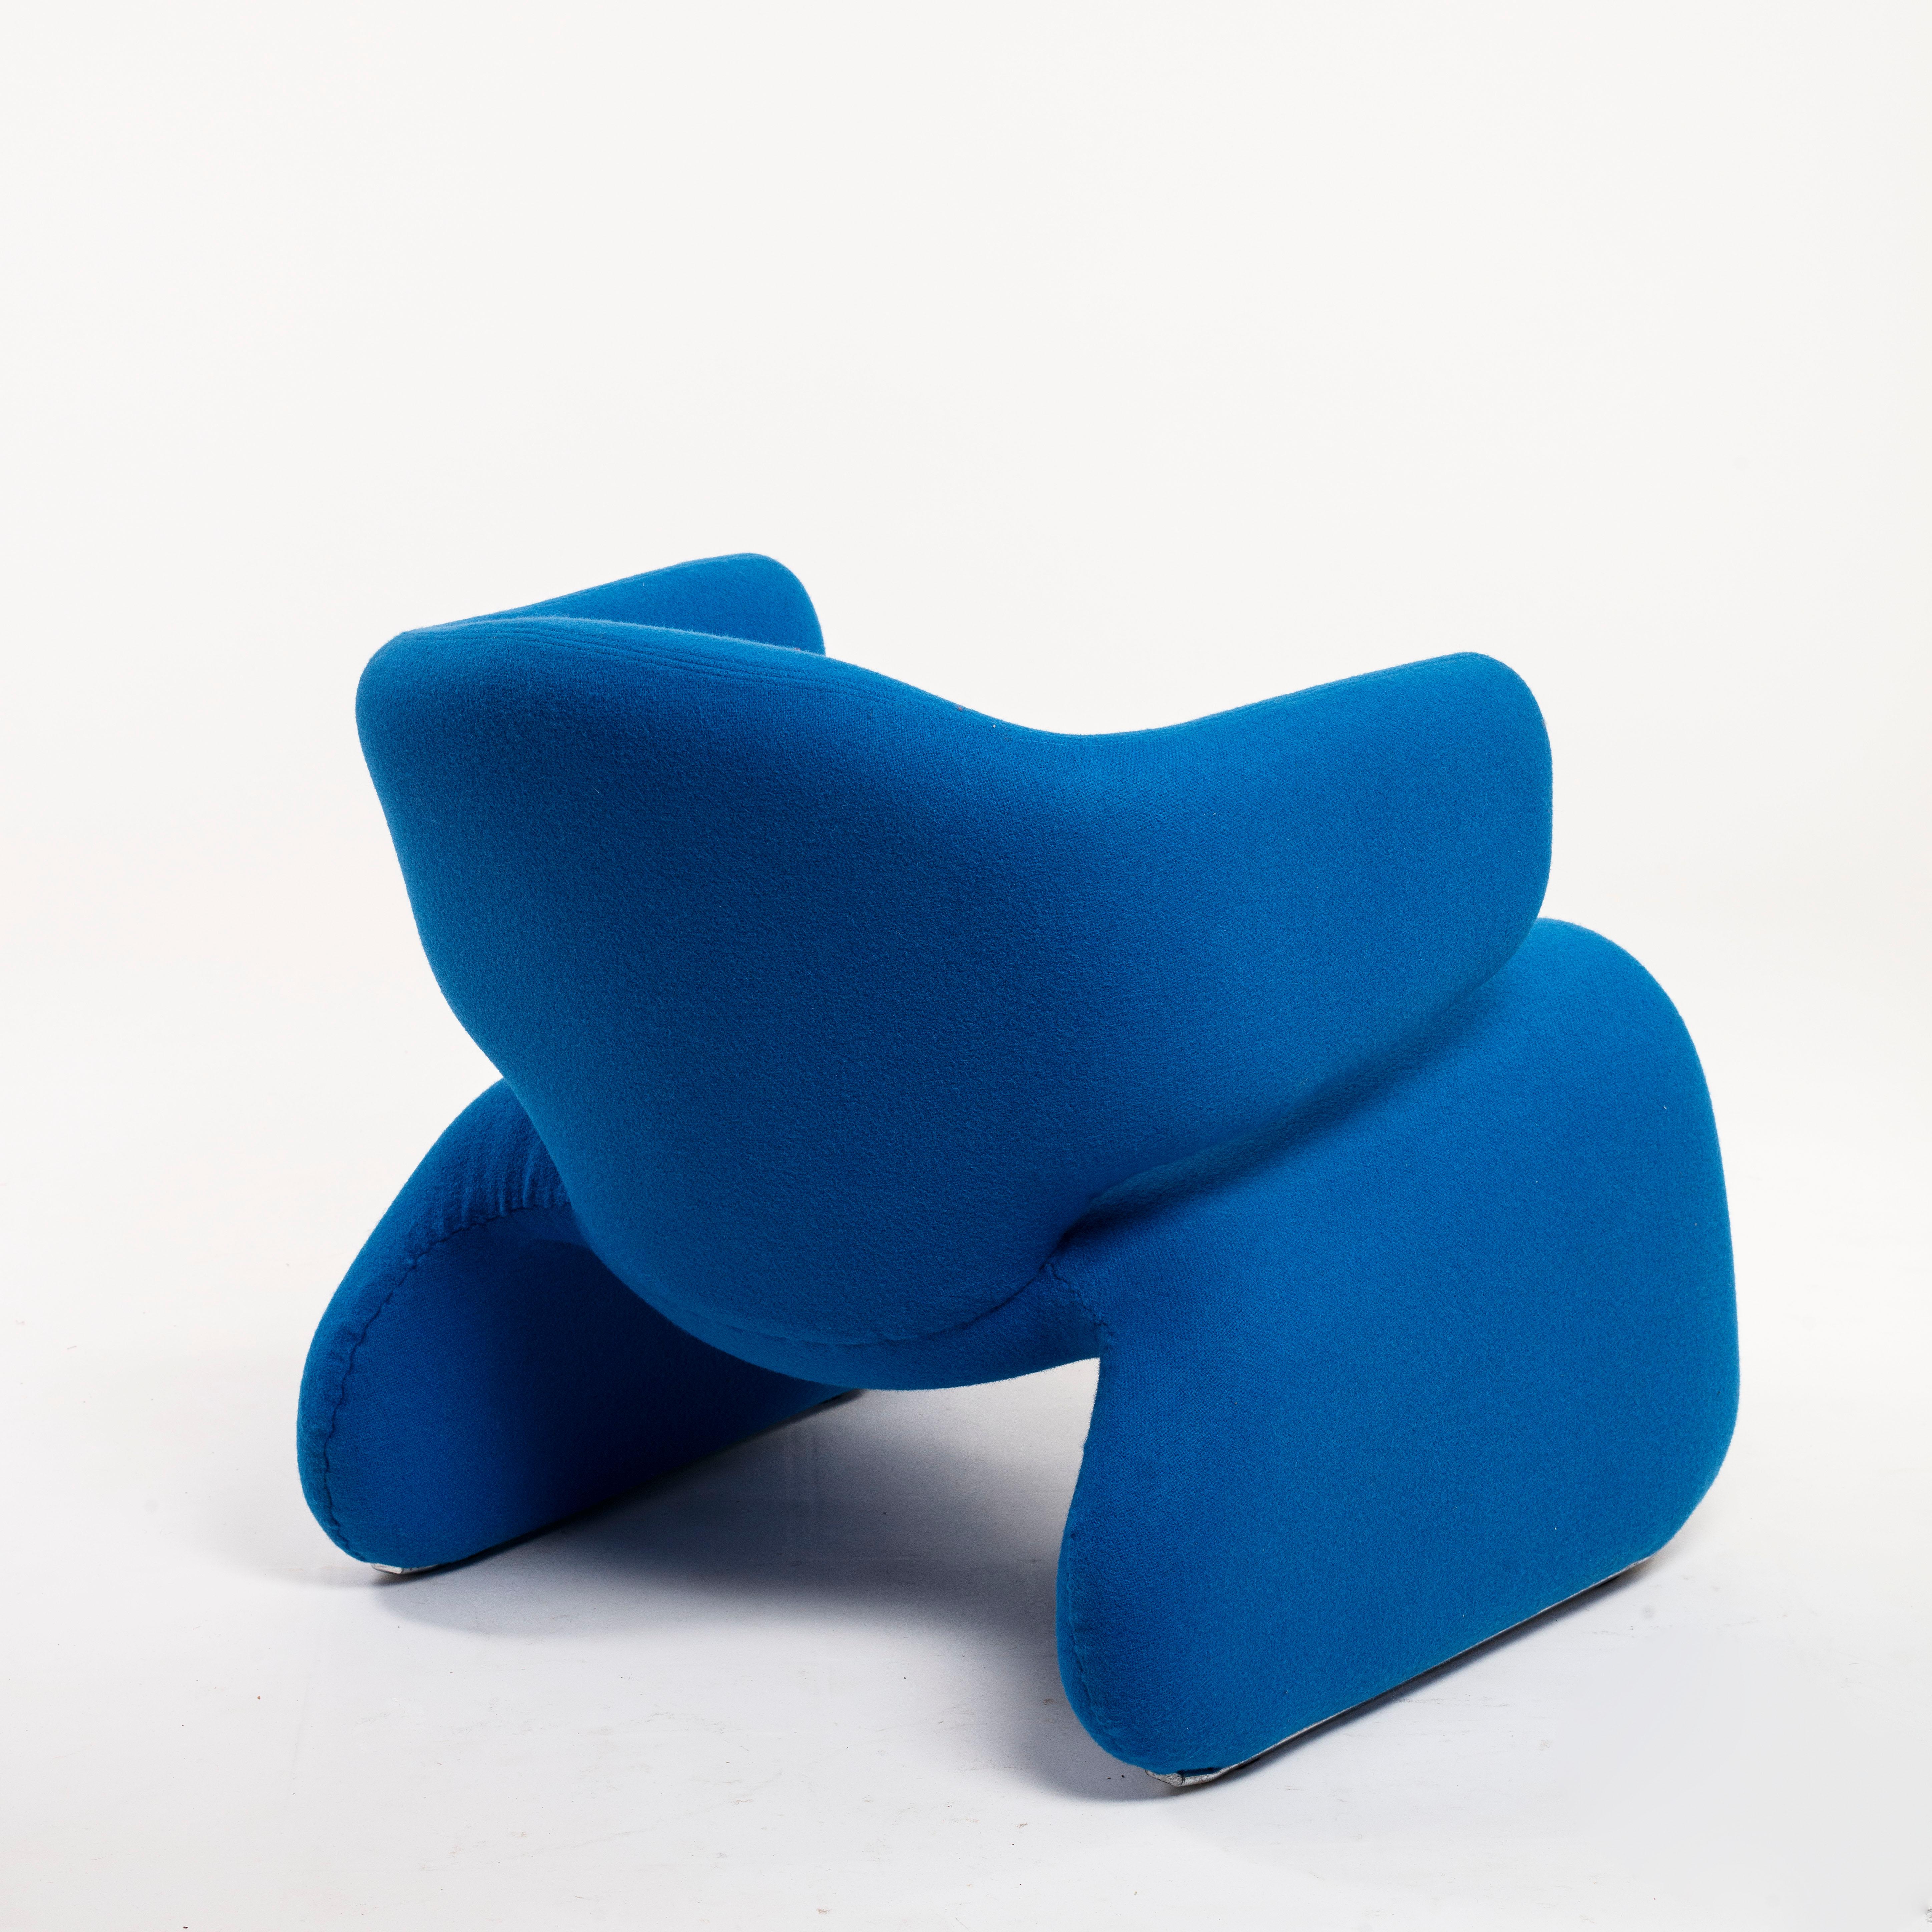 Late 20th Century Olivier Mourgue Djinn Blue Armchair for Airborne 1960s New Kvadrat Fabric